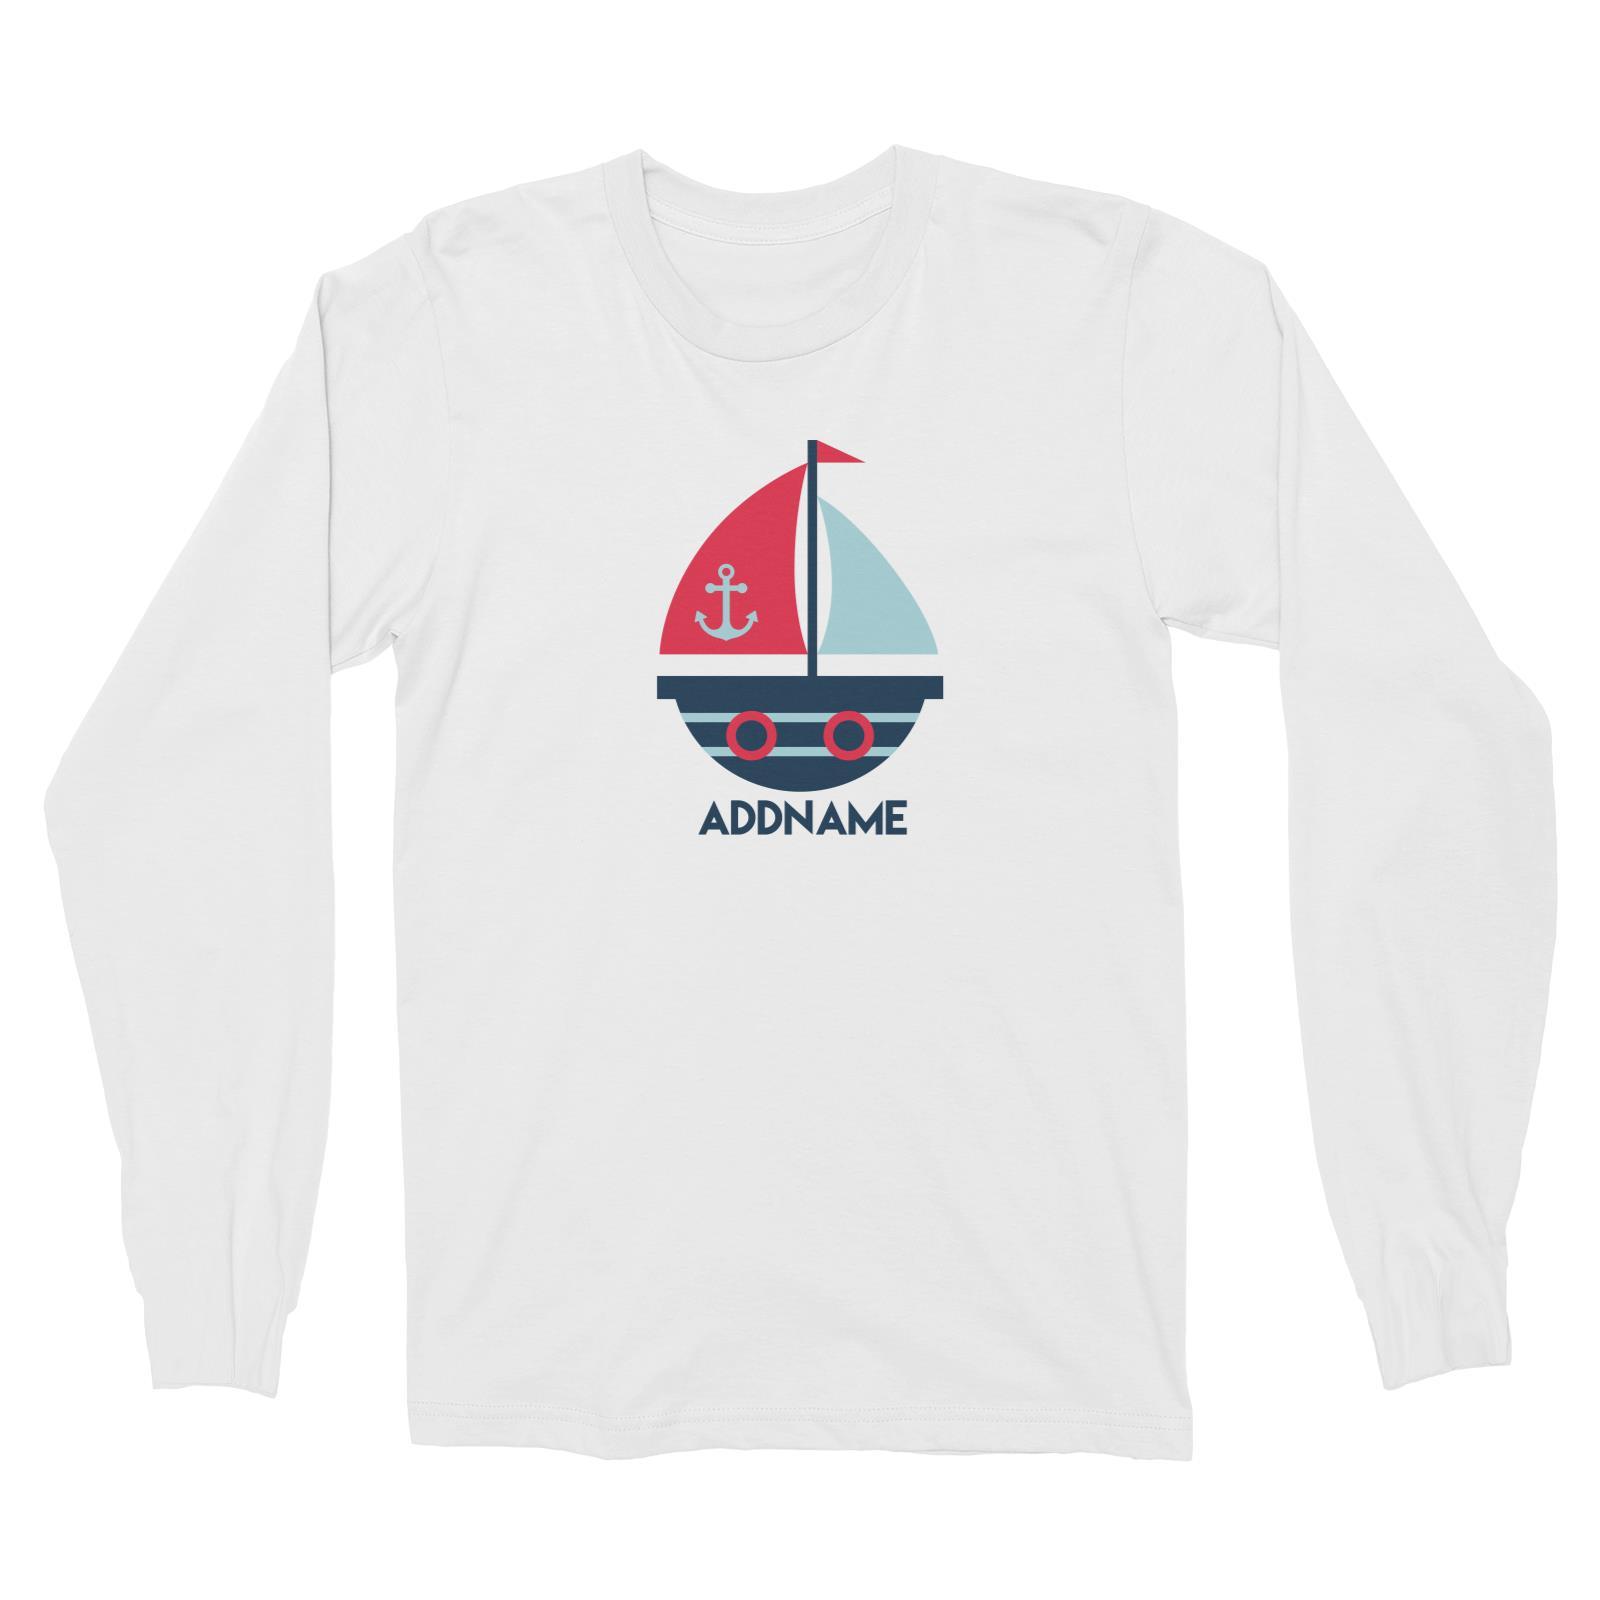 Sailor Boat Addname Long Sleeve Unisex T-Shirt  Matching Family Personalizable Designs